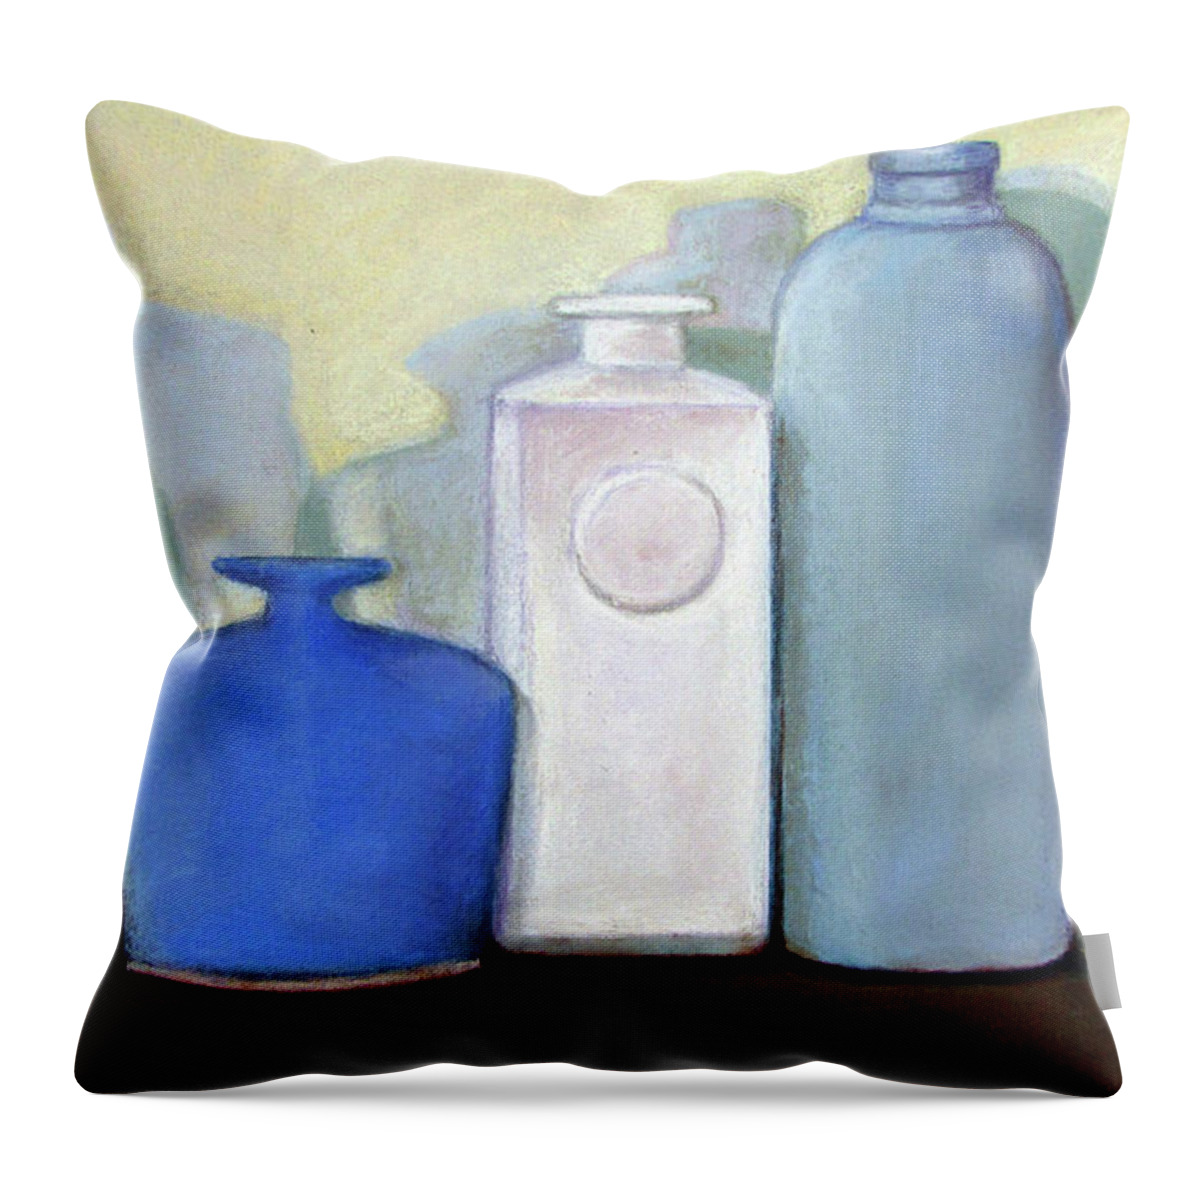 Still Life Throw Pillow featuring the pastel Vessels by MaryJo Clark